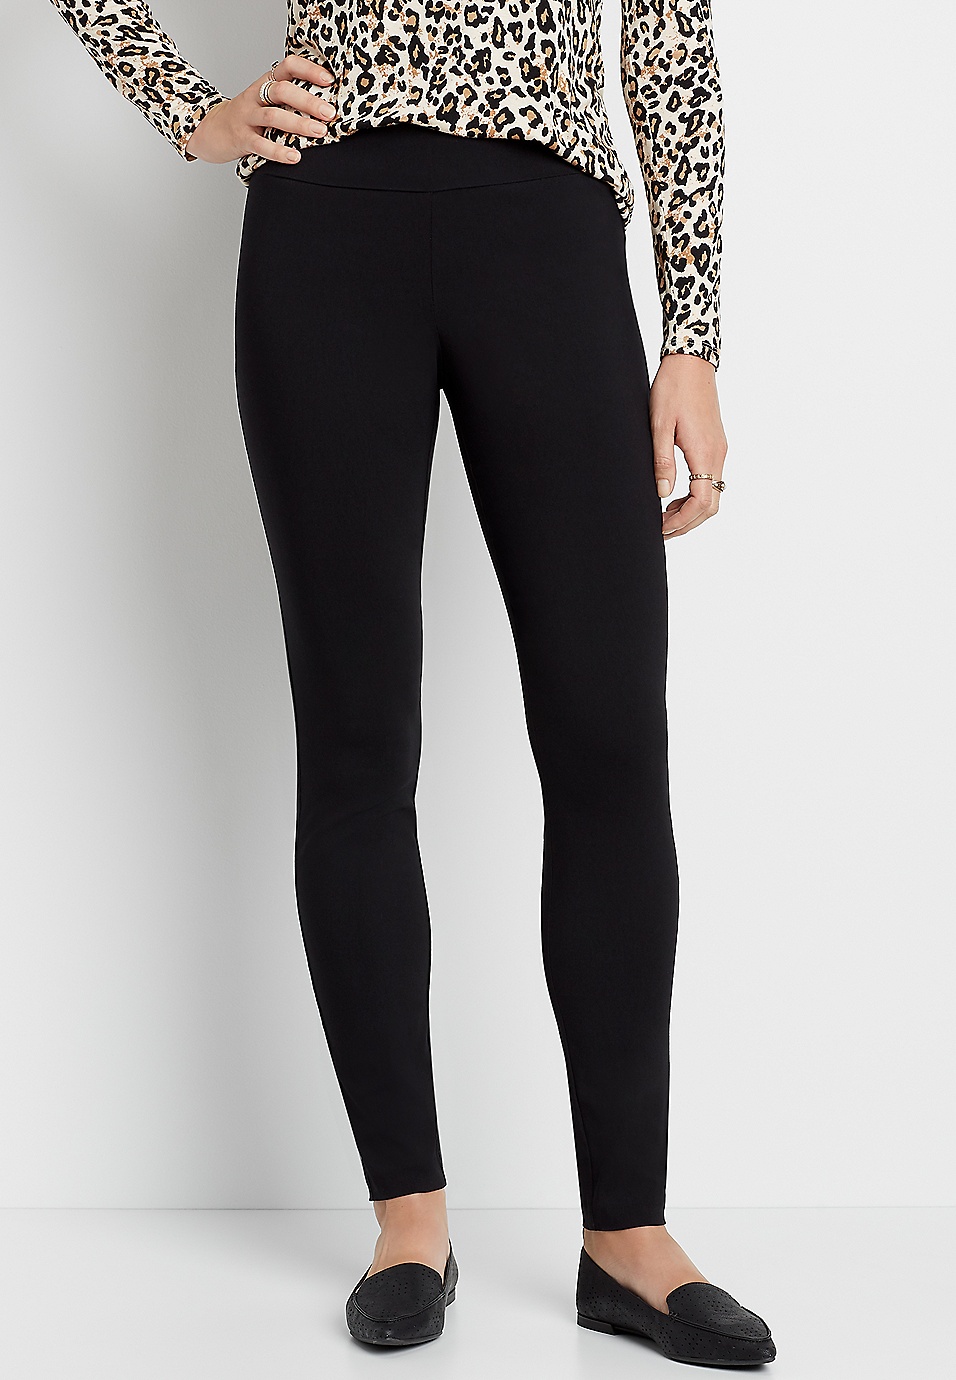 Pull On Bengaline Skinny Ankle Pant | maurices